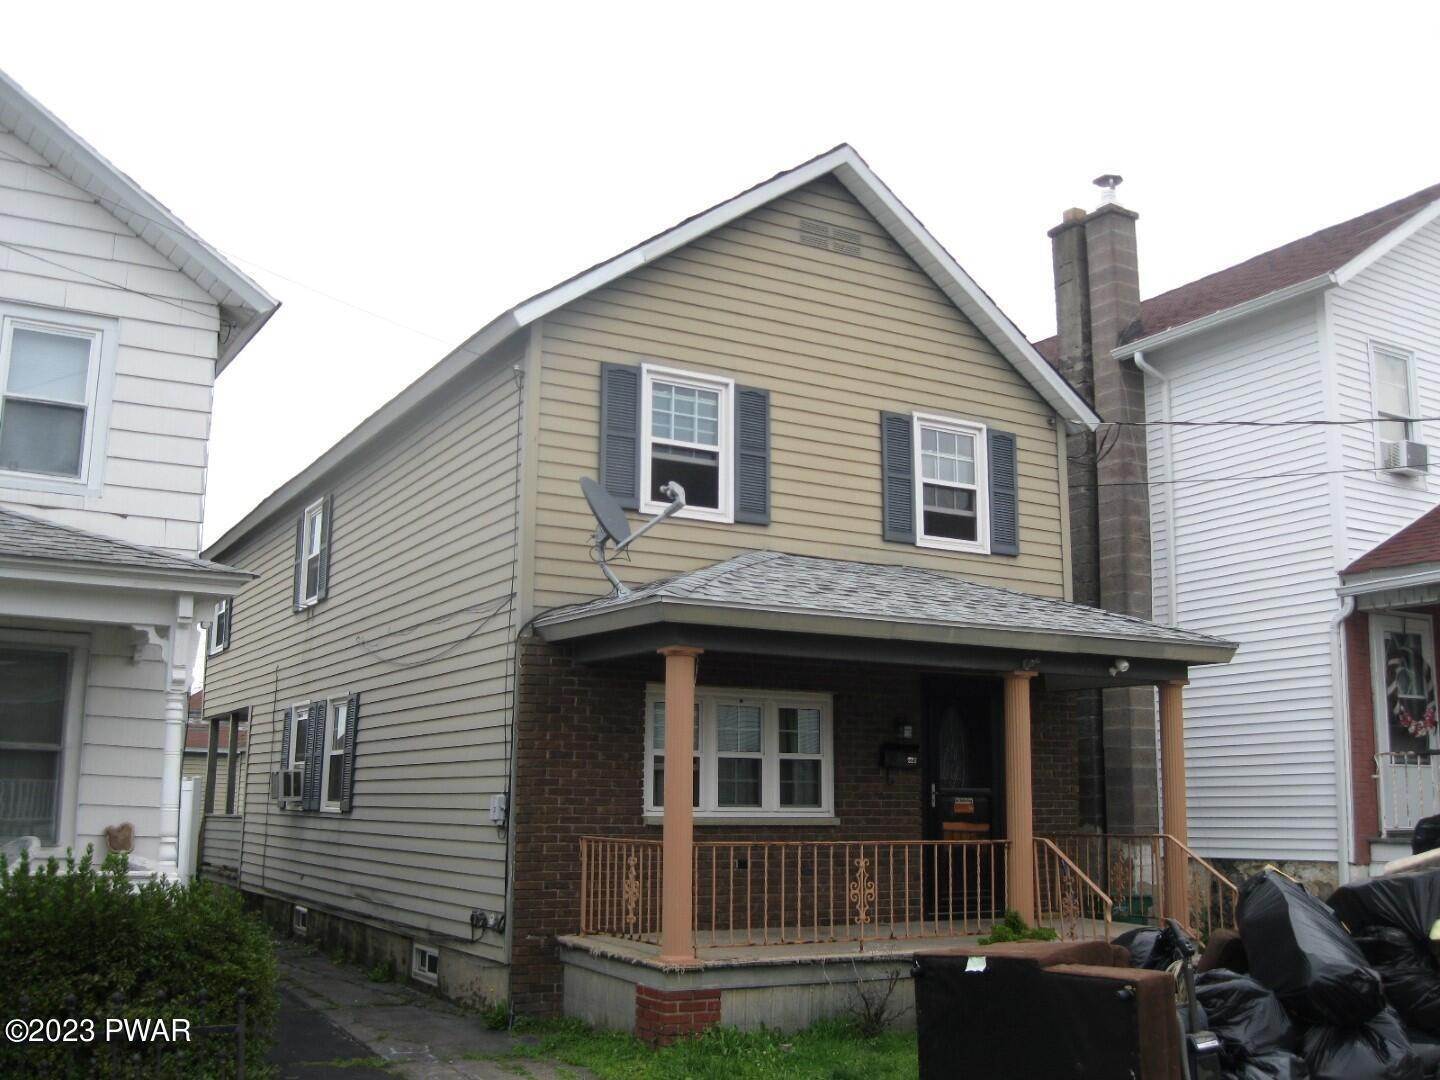 Single Family Homes for Sale at 325 Dolph Street Jessup, Pennsylvania 18434 United States